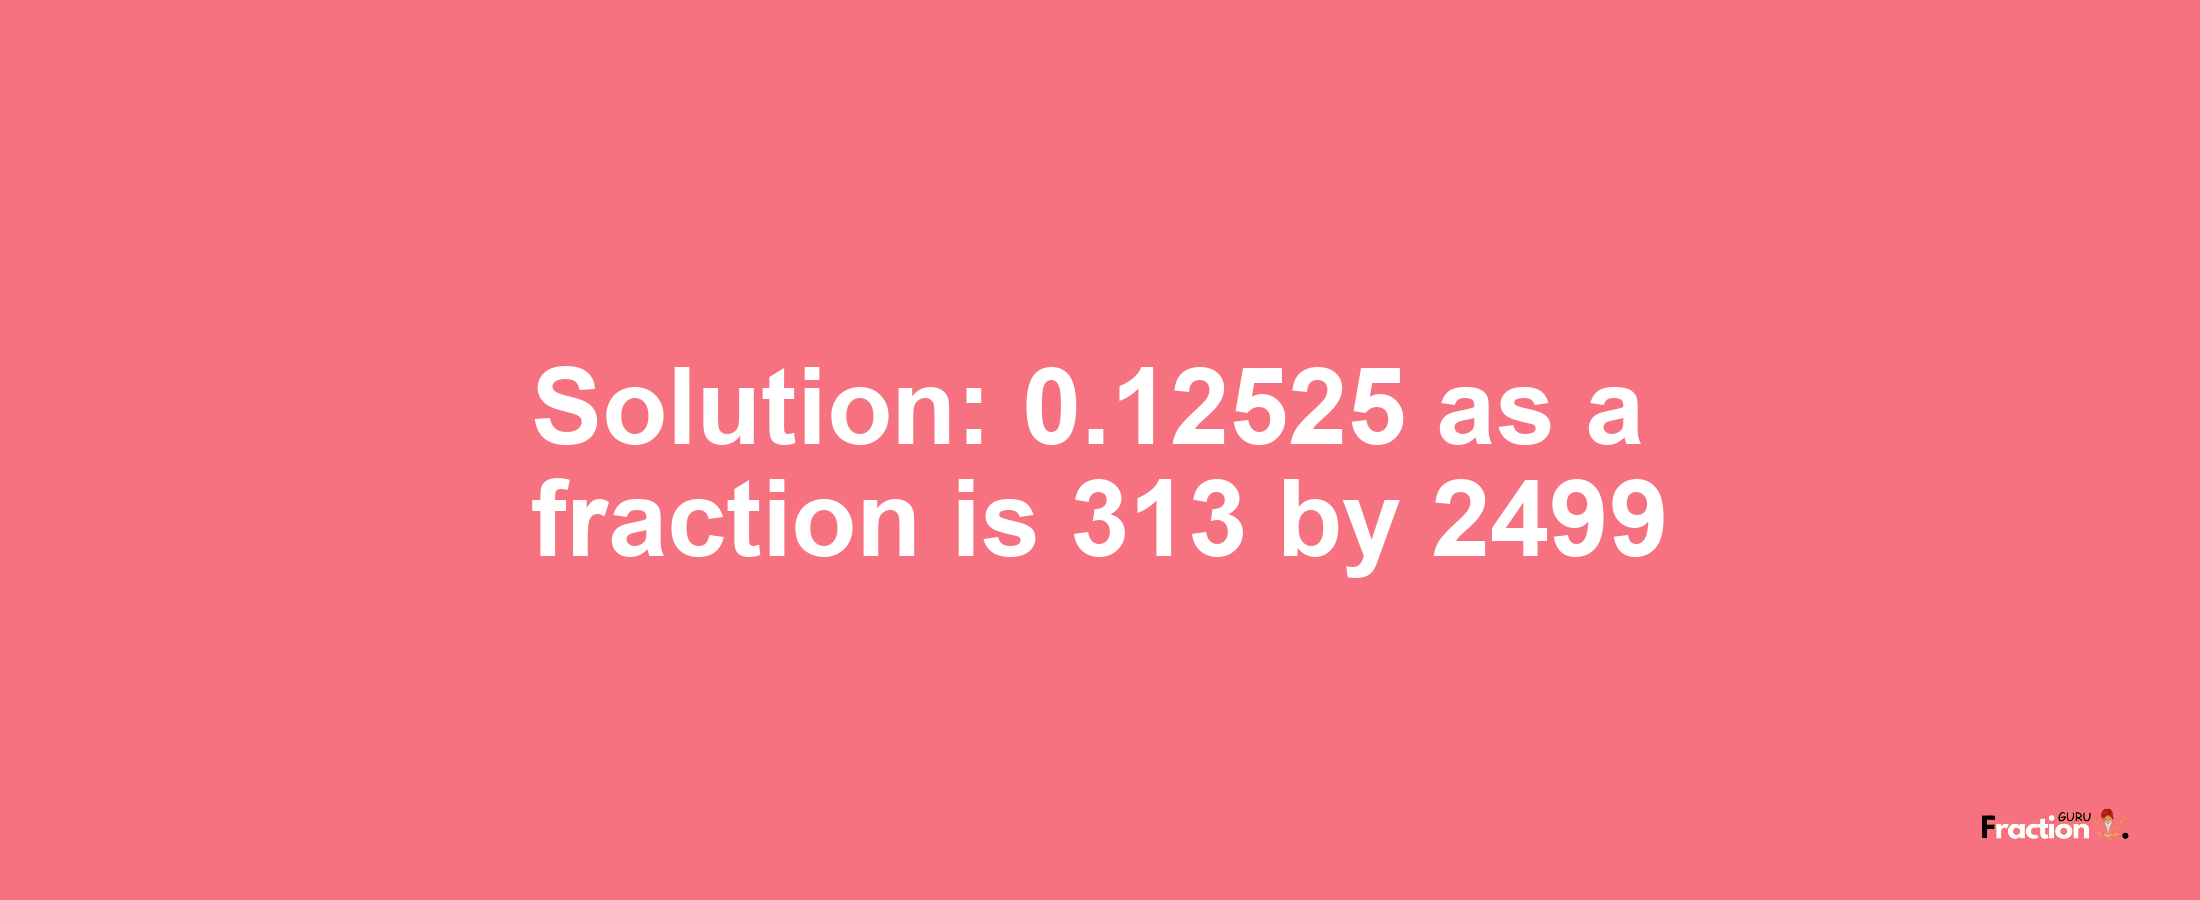 Solution:0.12525 as a fraction is 313/2499